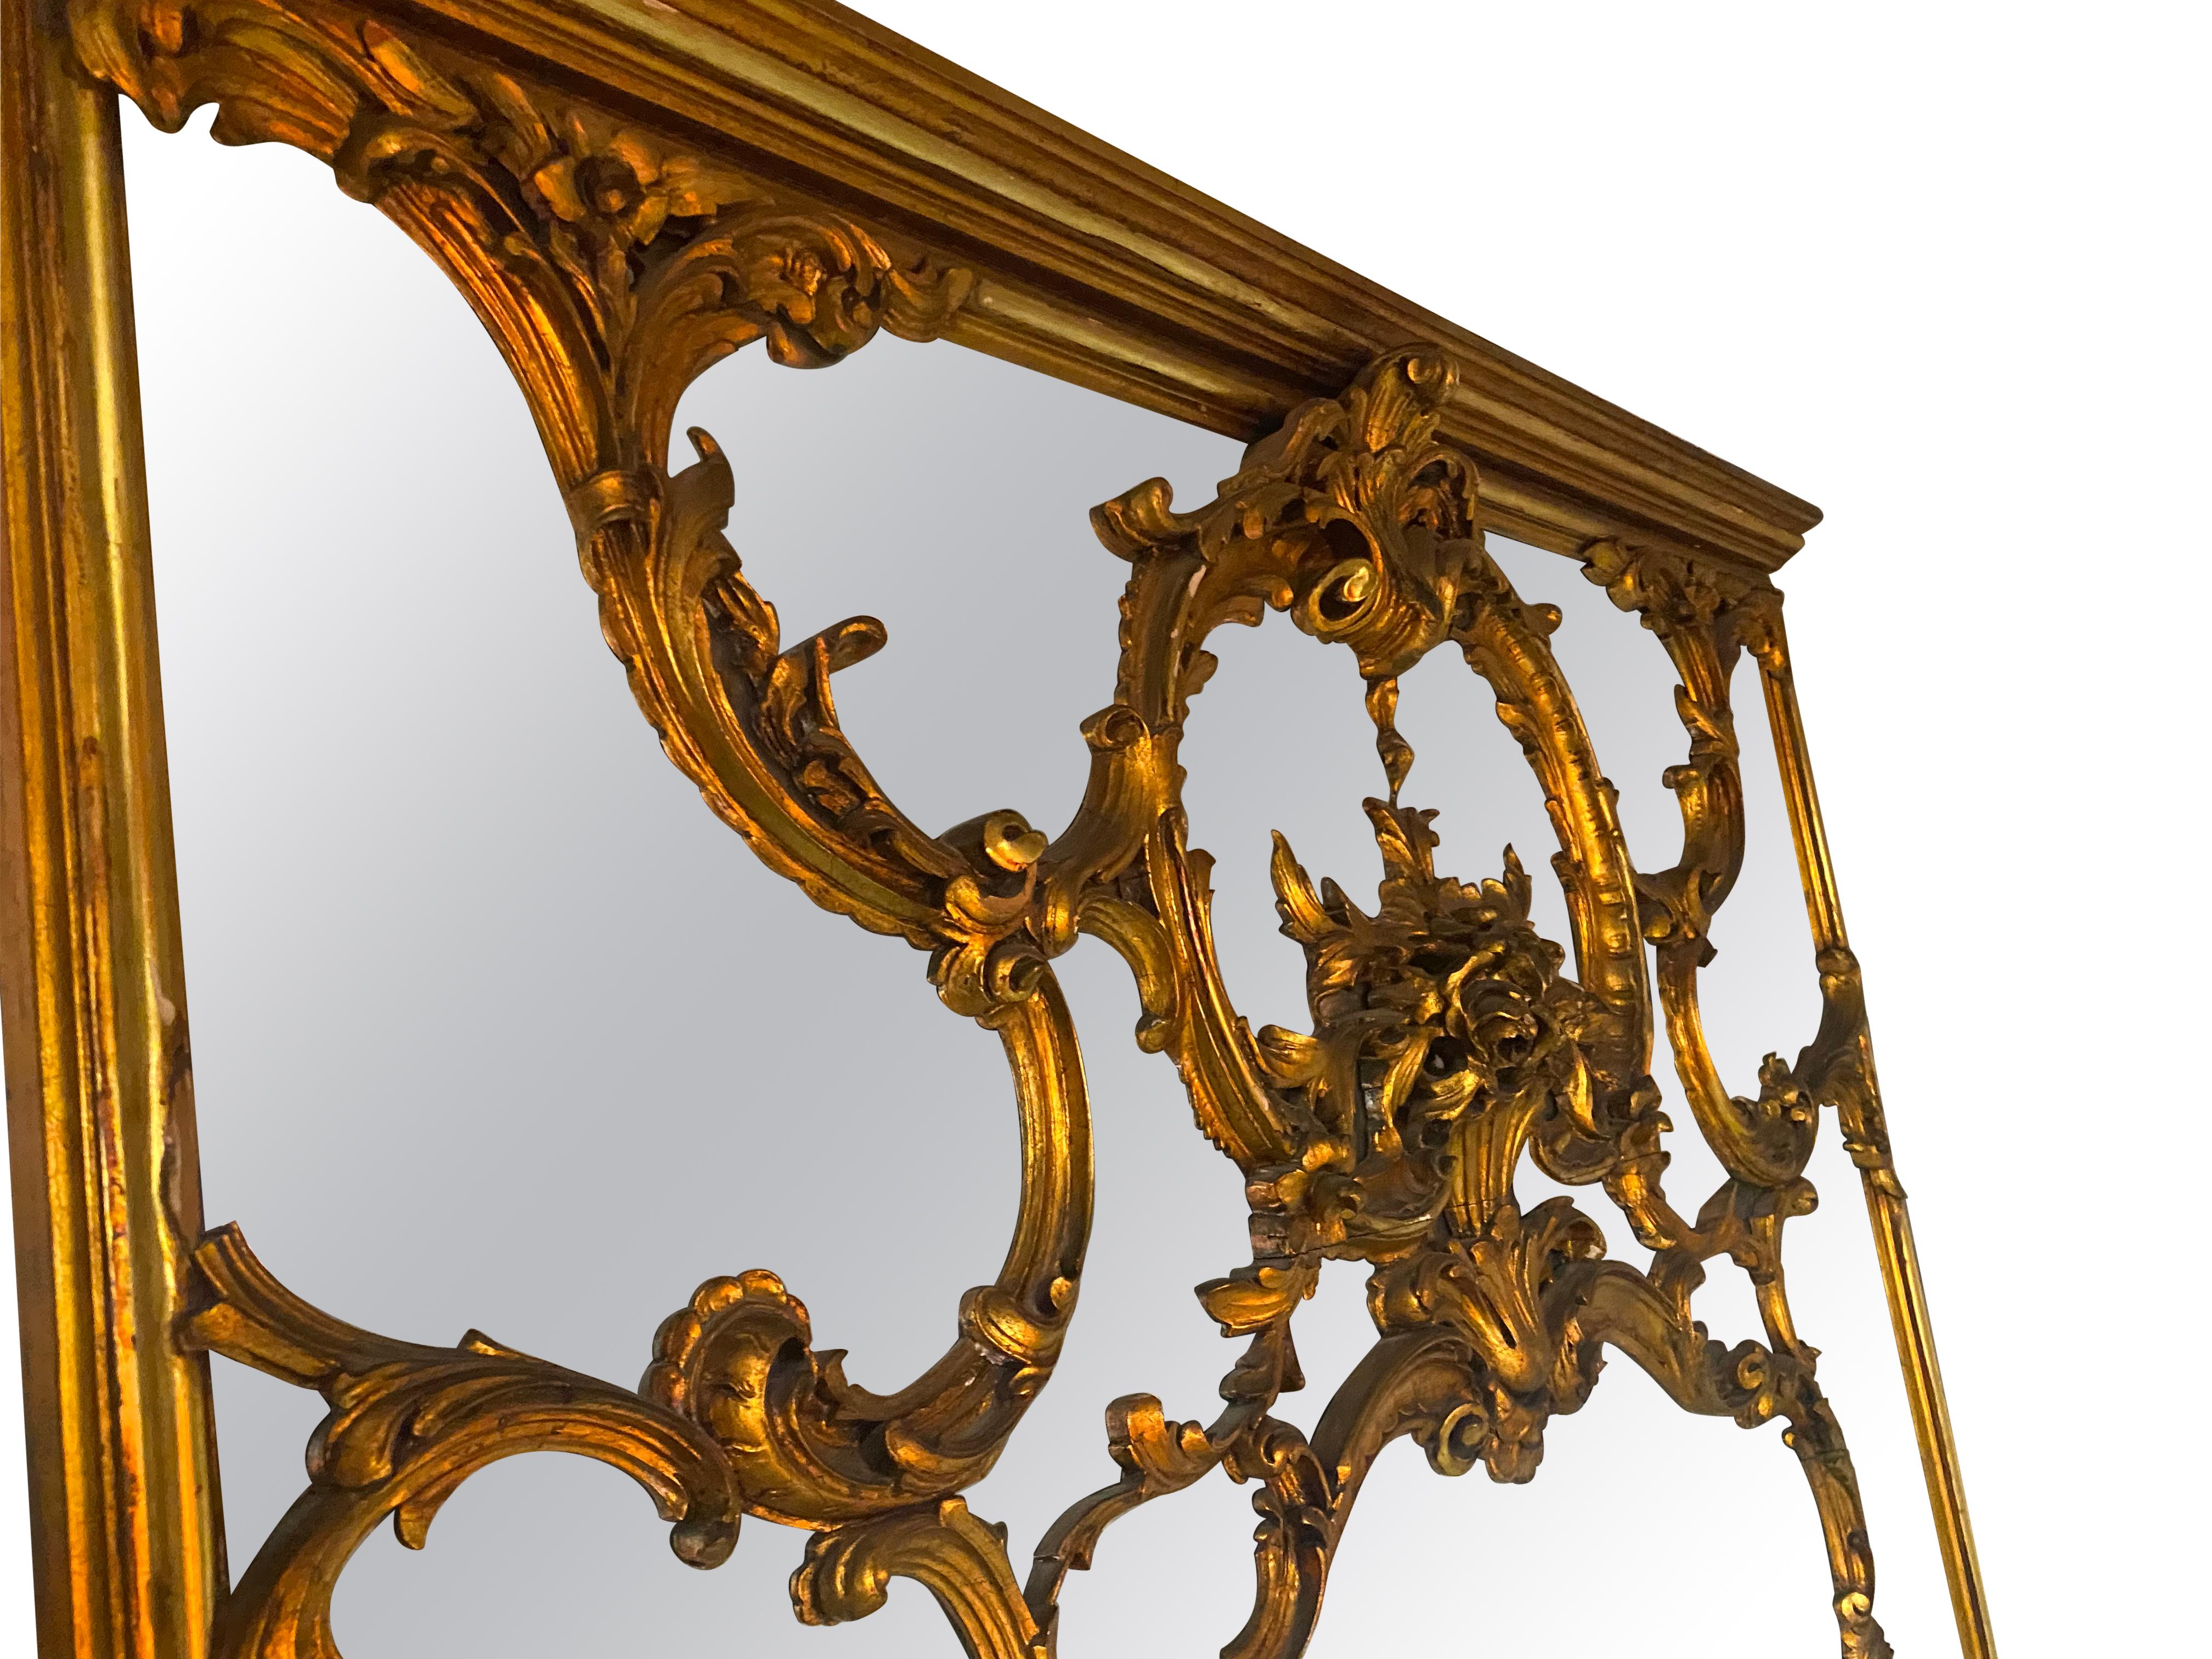 Antique, Decorative, Giltwood, Full Length Mirror  For Sale 3